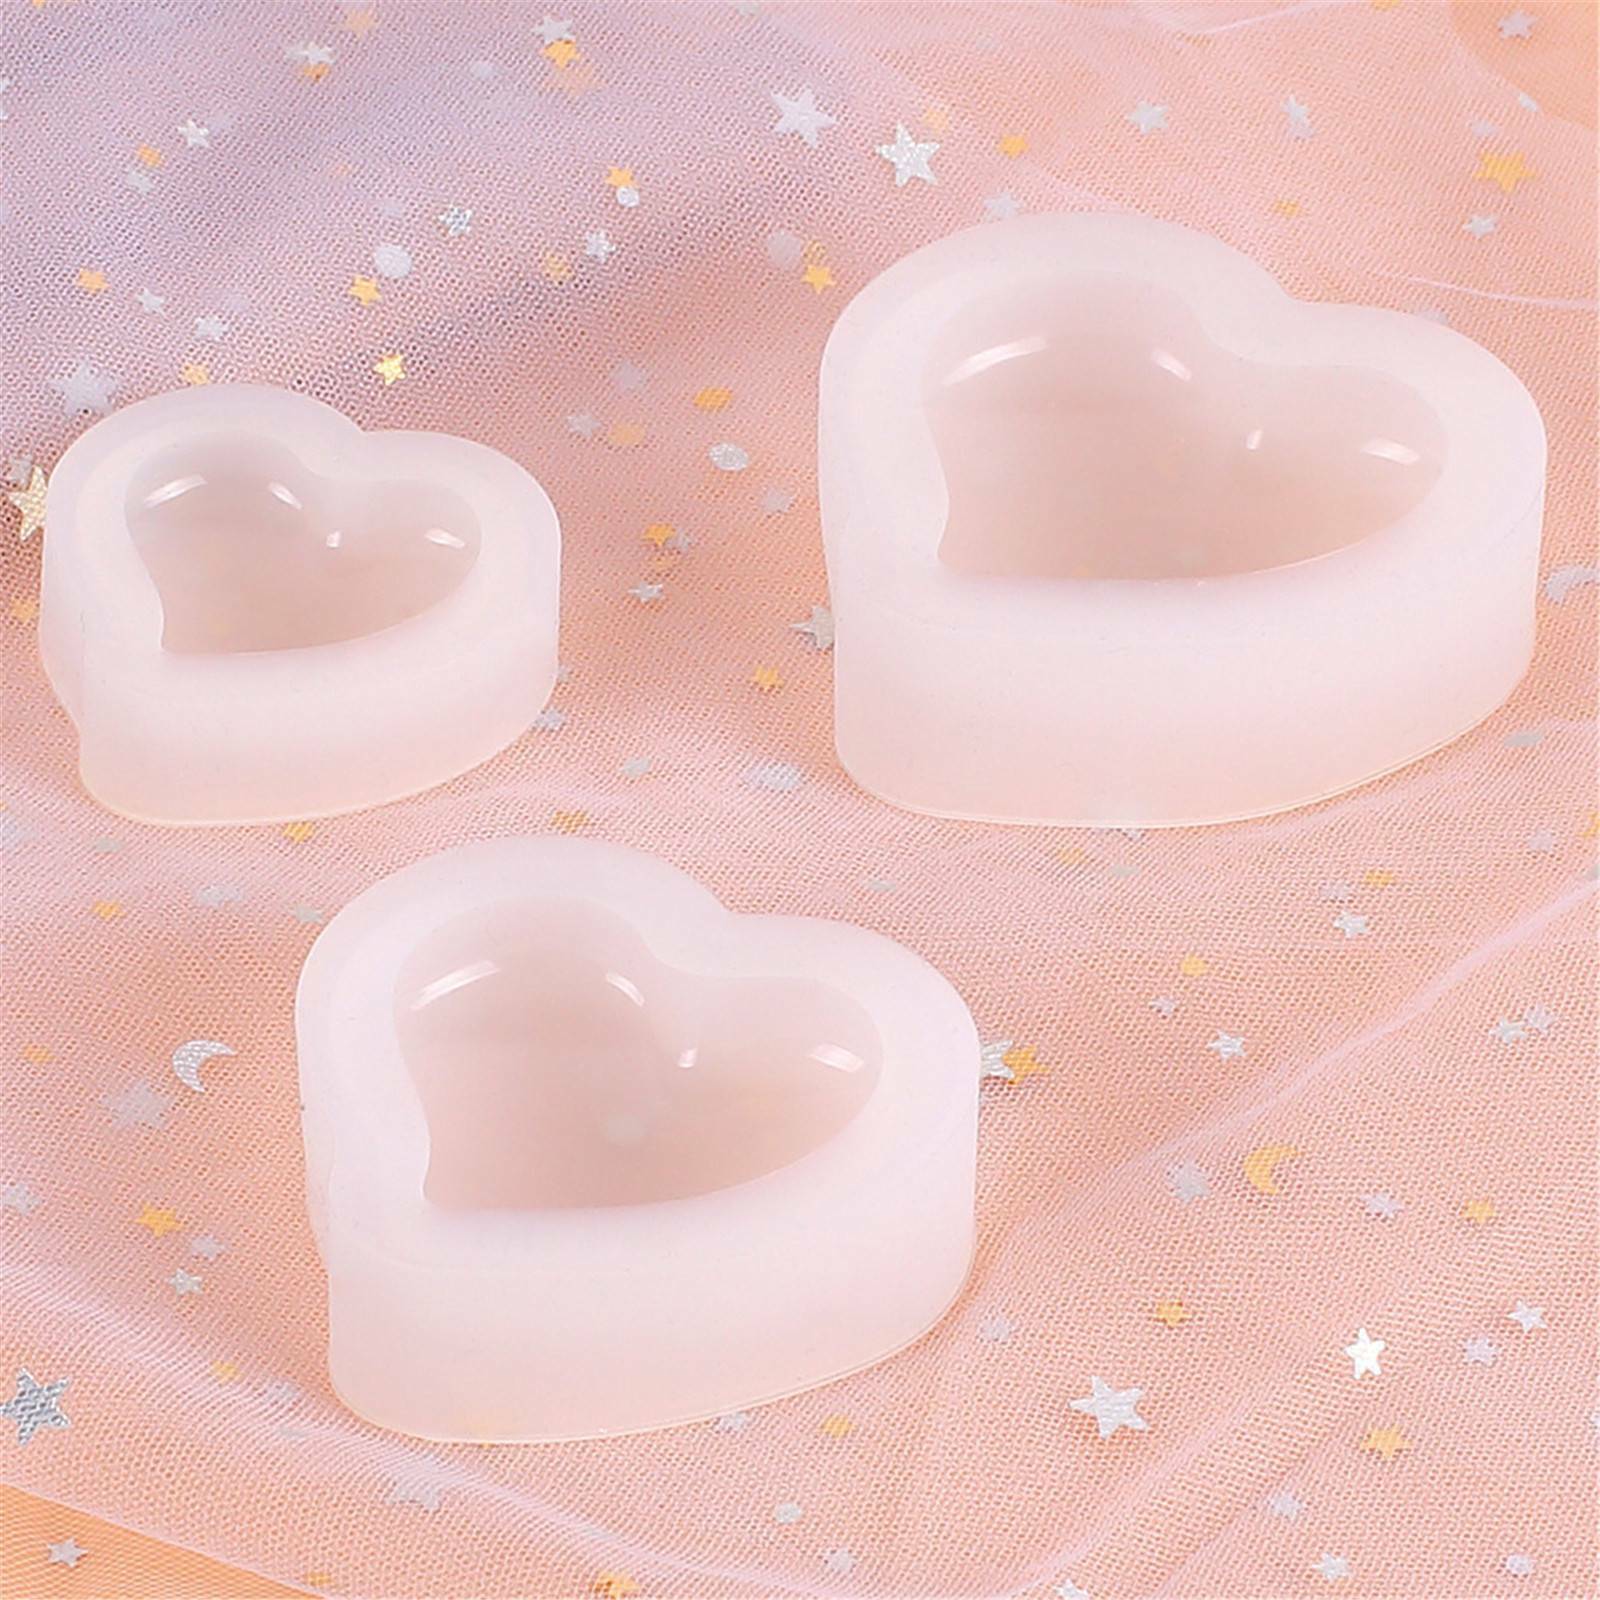 3D Heart Silicone Molds for Epoxy Resin Small Mirror Heart Shape Resin Mold